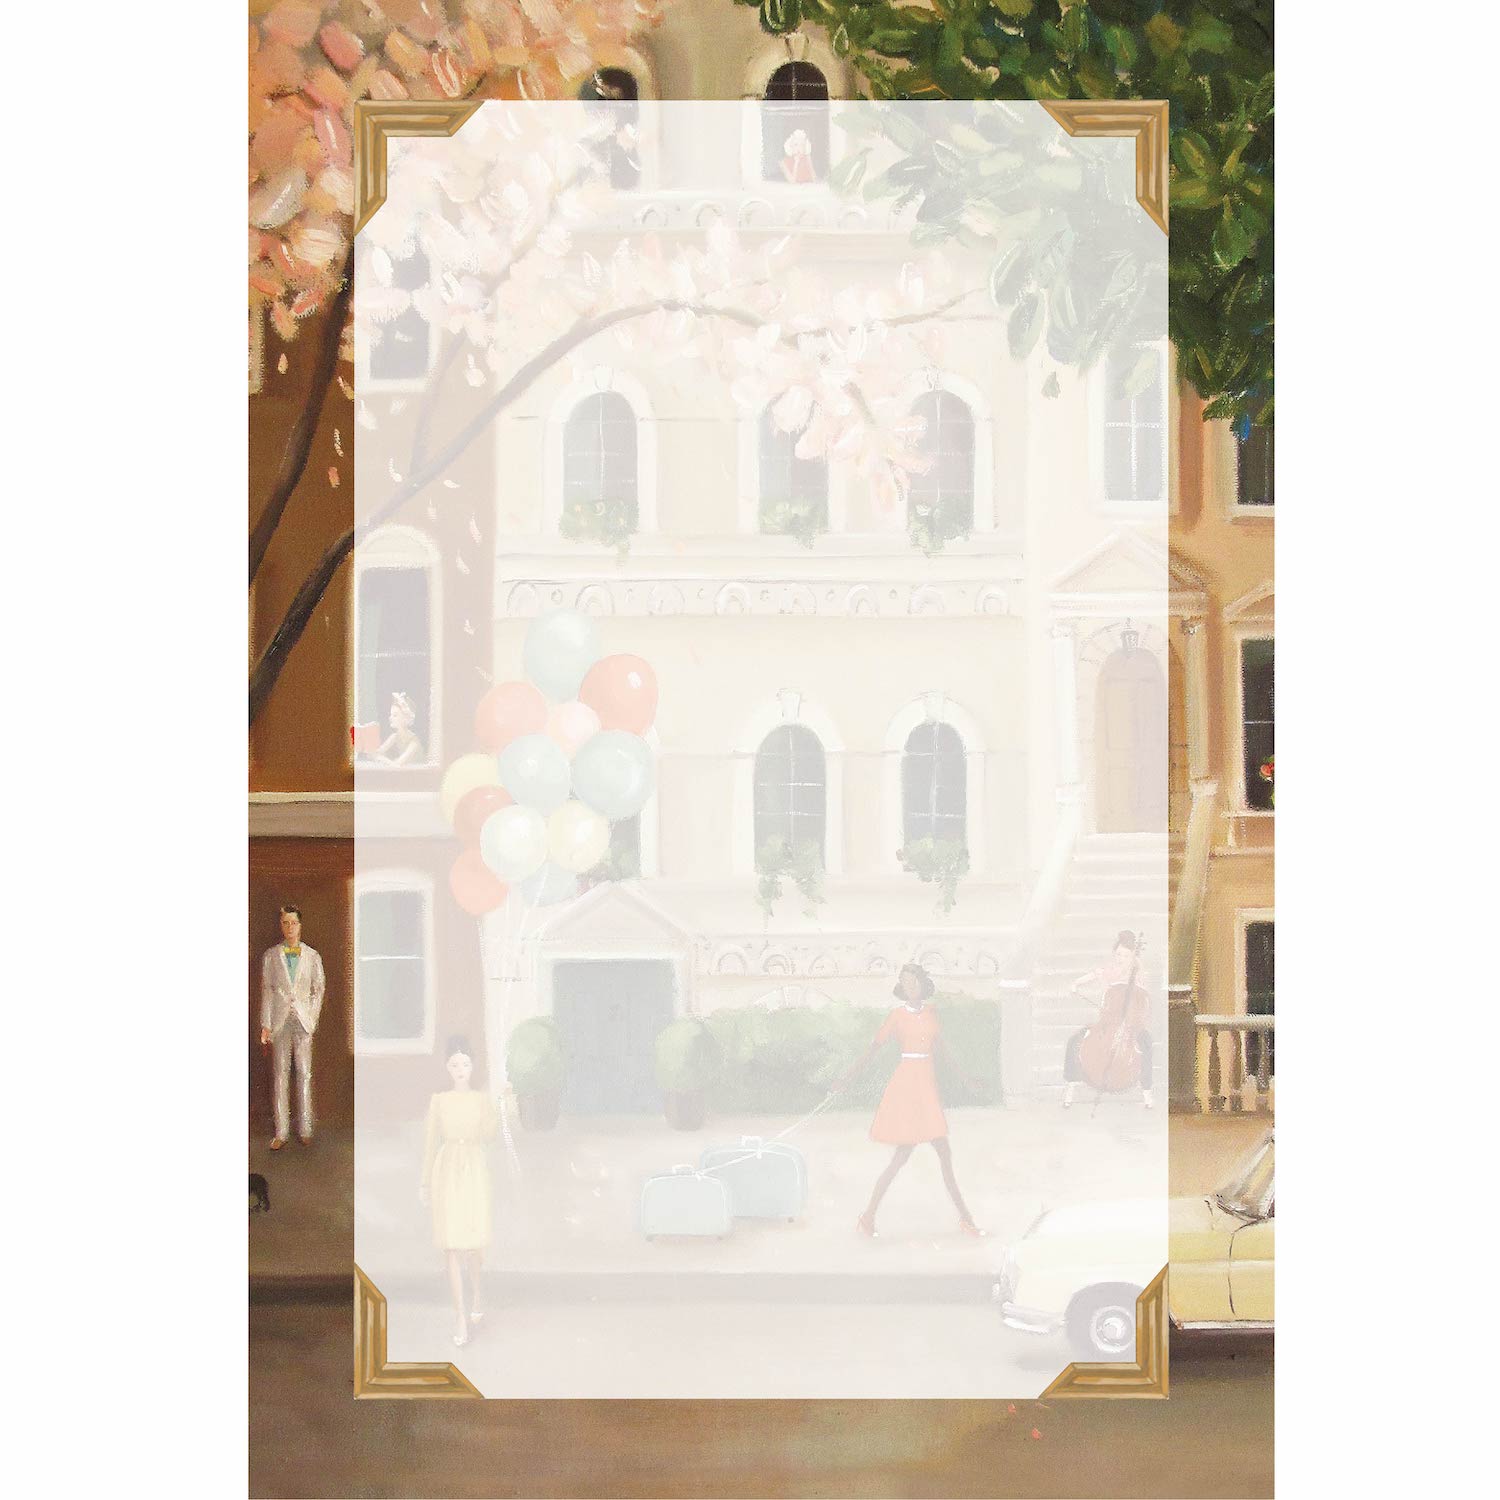 A spiral-bound painting by Janet Hill Studio depicting a woman walking down the street with balloons, inspired by a Hester &amp; Cook Atticus Bailey Notepad.